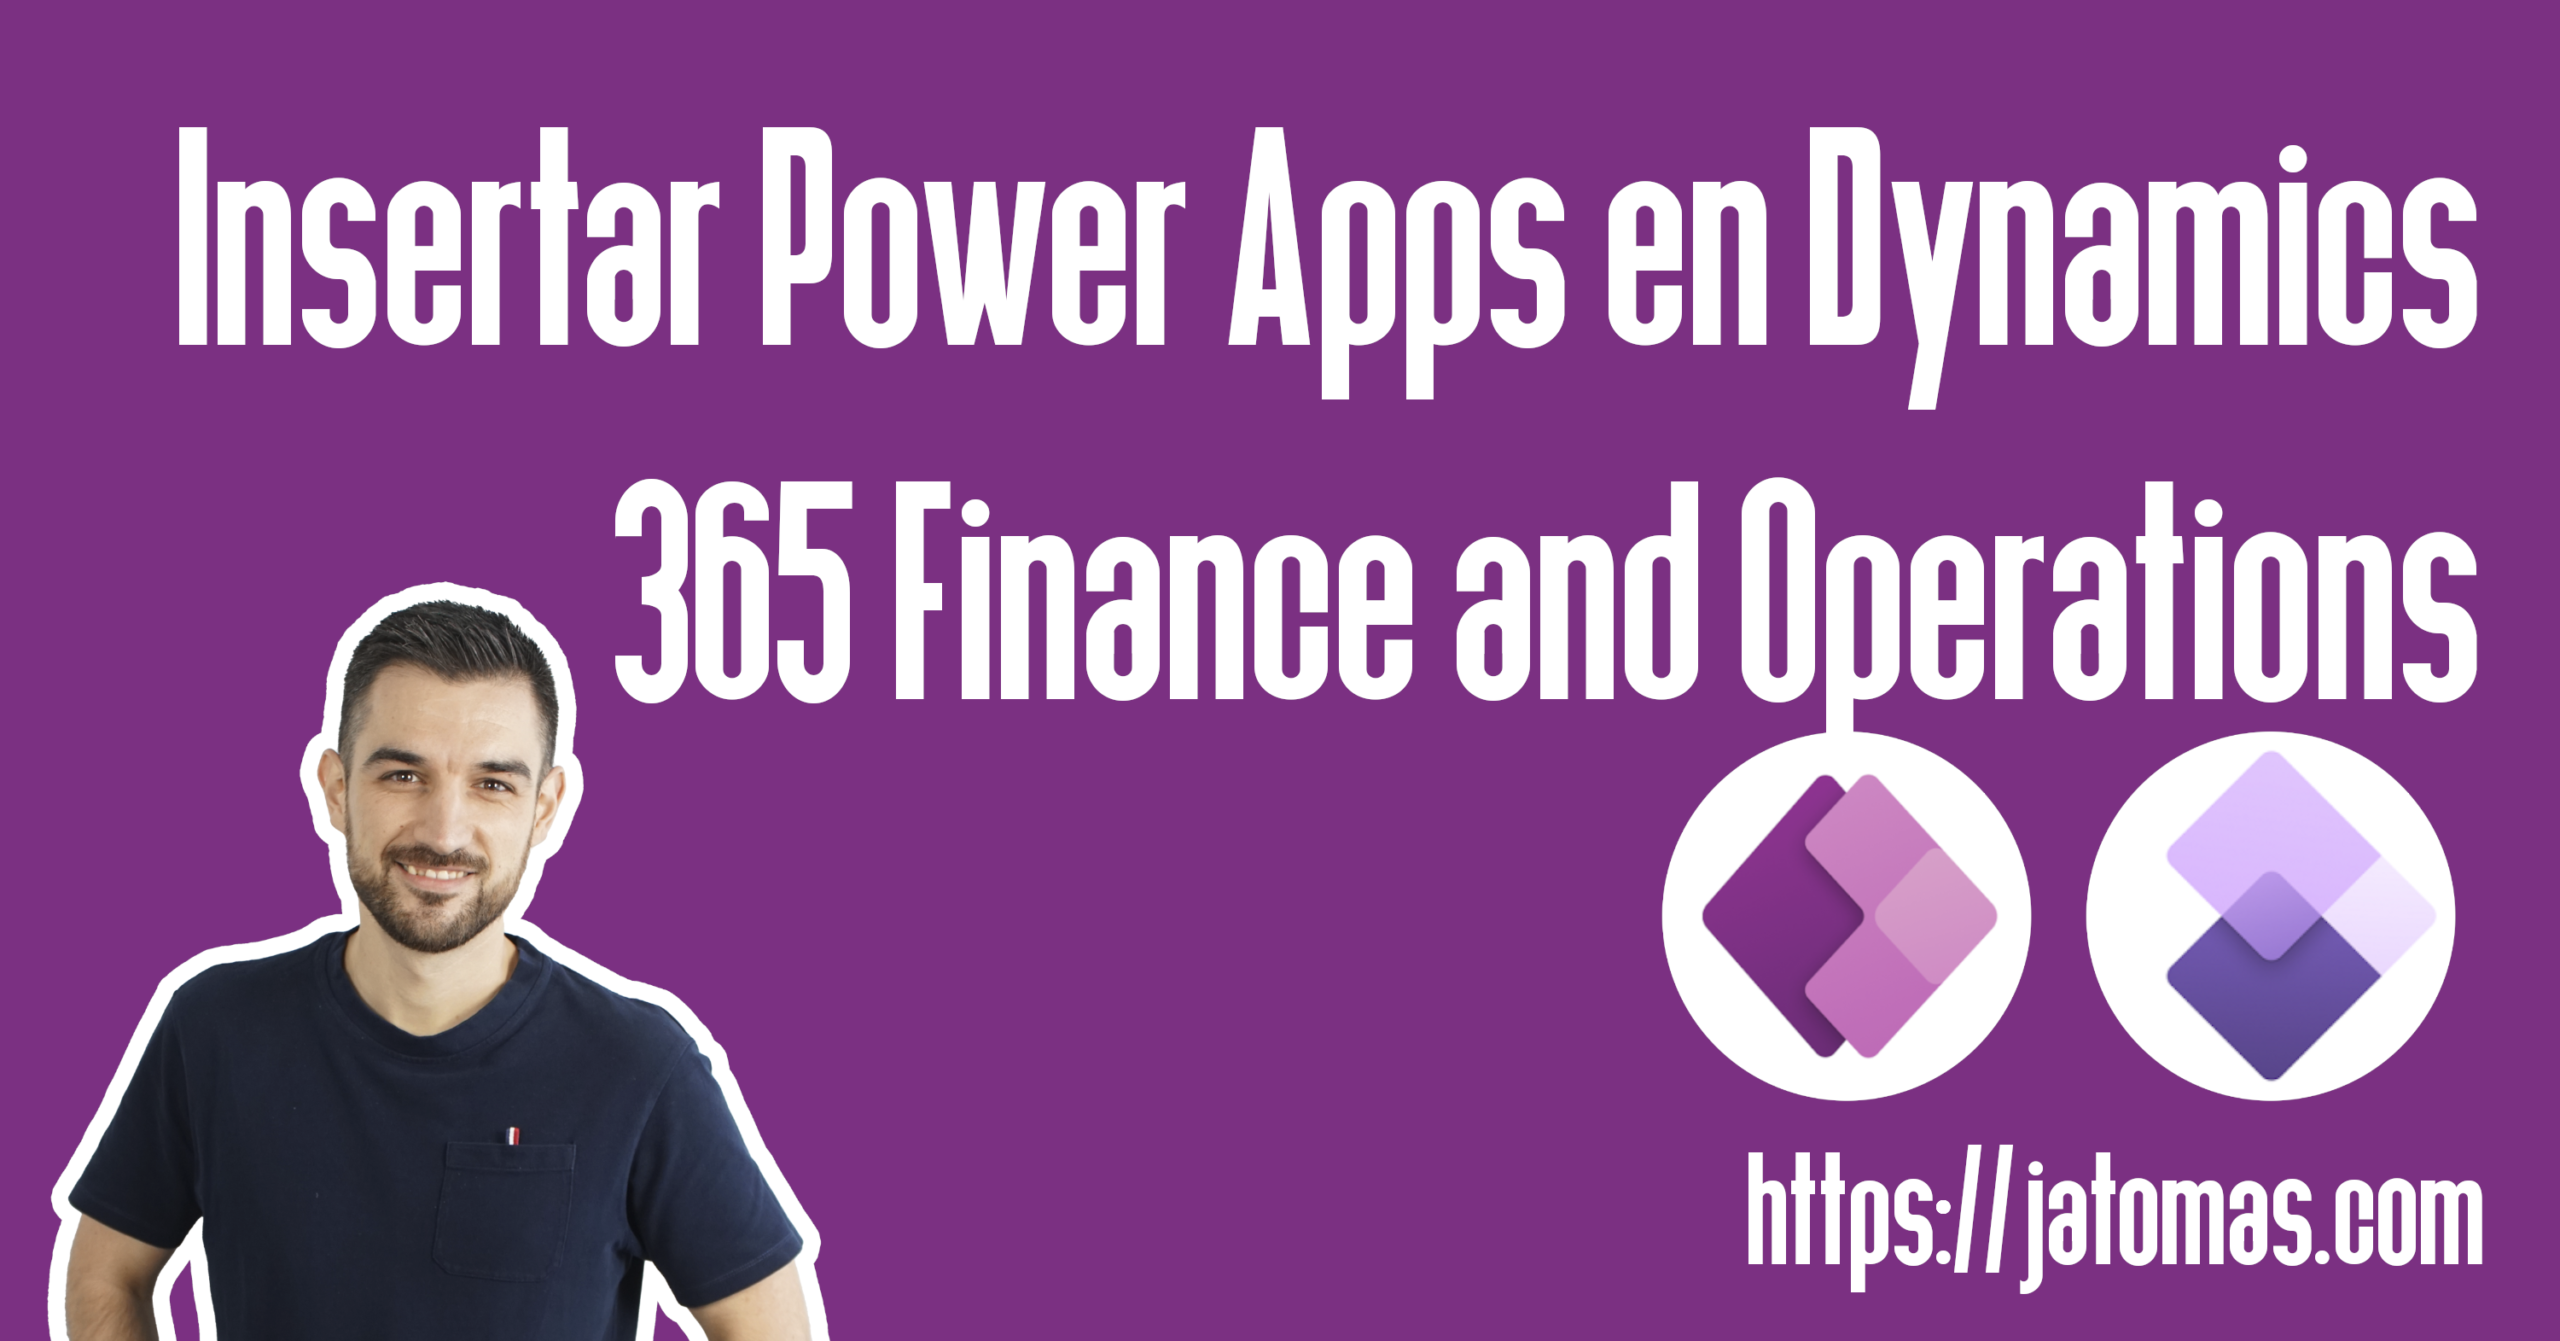 Insertar Power Apps en Dynamics 365 Finance and Operations